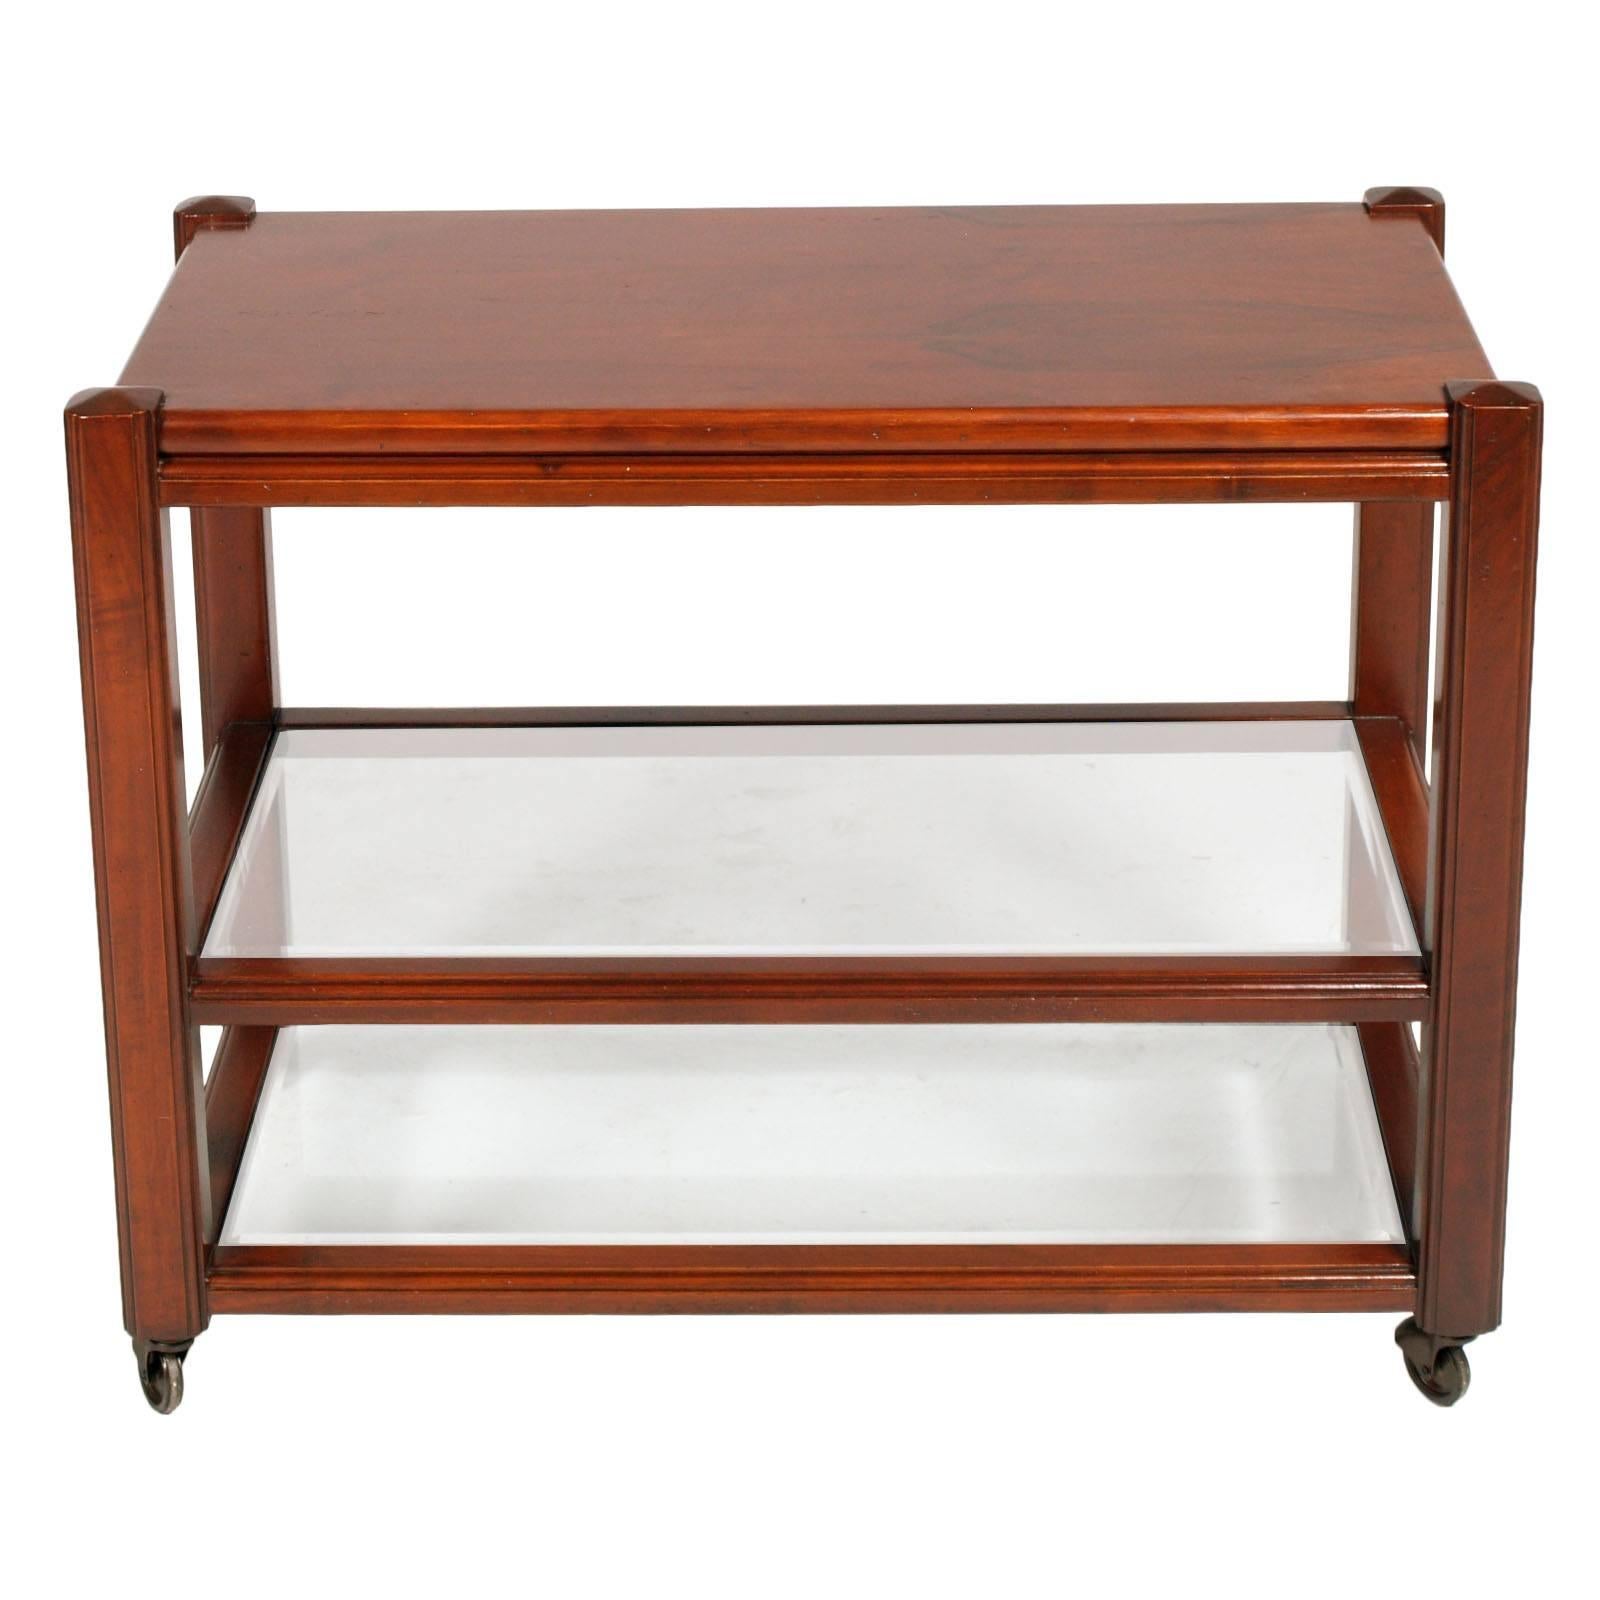 Mid-century modern coffee table bar cart in massive mahogany wood and two crystal shalves by Frattini per Saporiti, 1960s.
Excellent condition.

Measure cm: H 63, W 80, D 46 (Top shelf height 28cm, lower shelf height 18cm).